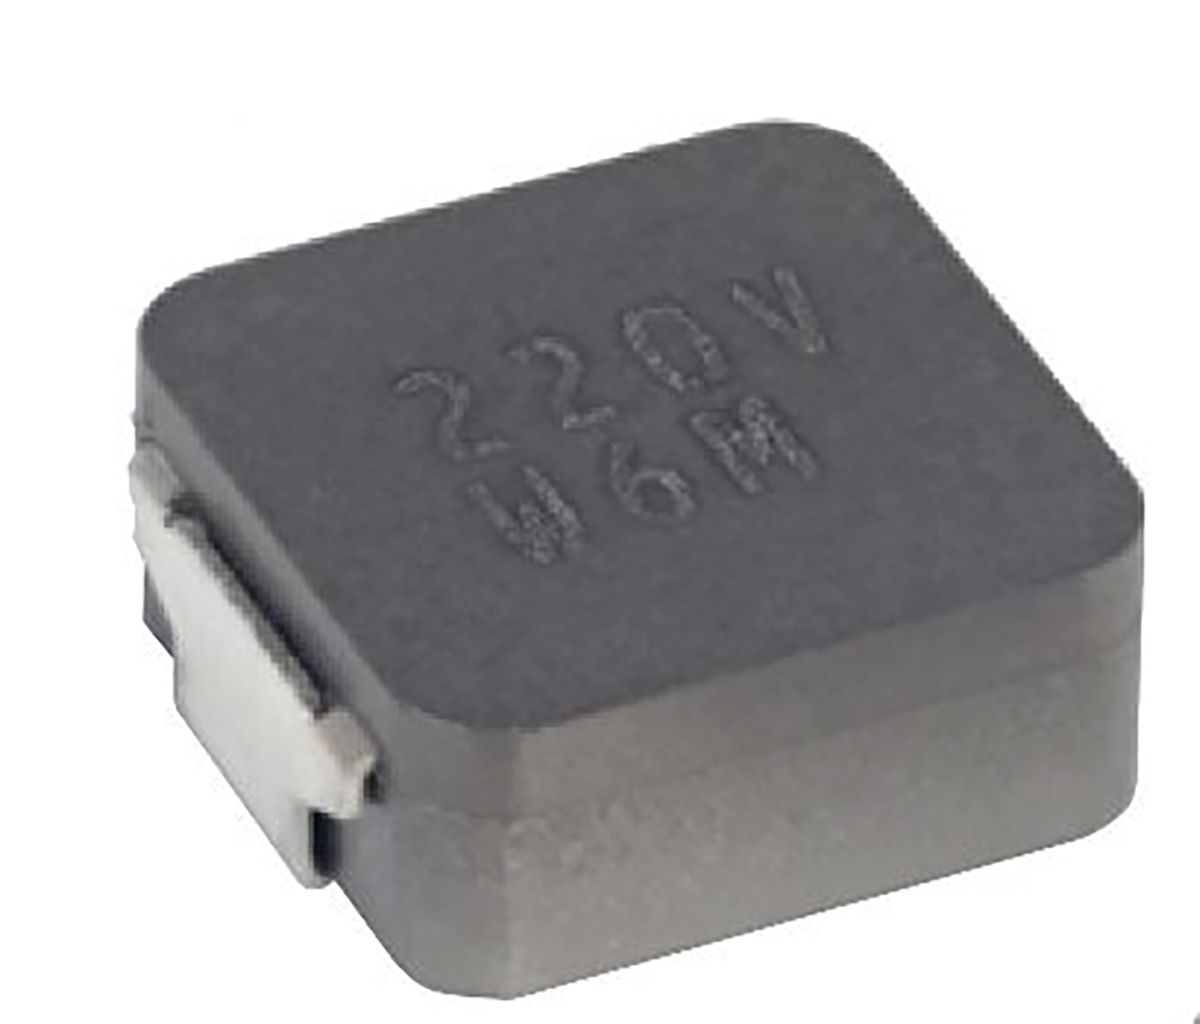 KEMET, MPLCV, 0654(3126) Shielded Wire-wound SMD Inductor with a Metal Composite Core, 22 μH ±20% Shielded 4.2A Idc